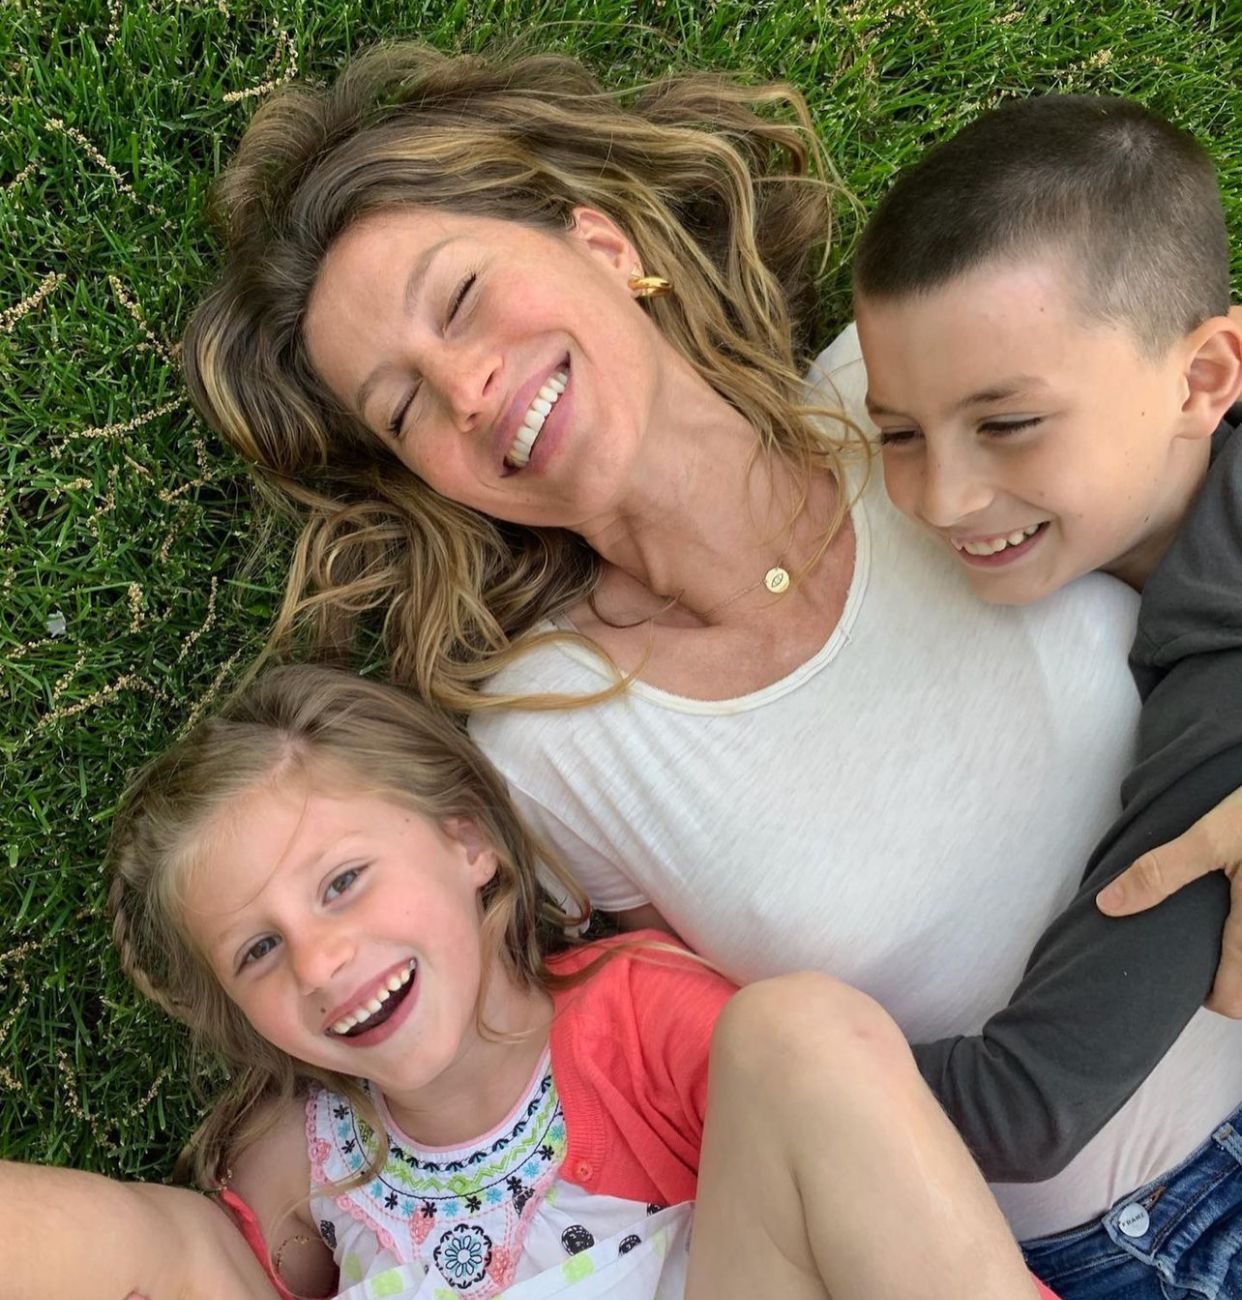 Gisele pointed out that she is proud of her son. (Photo: Instagram)